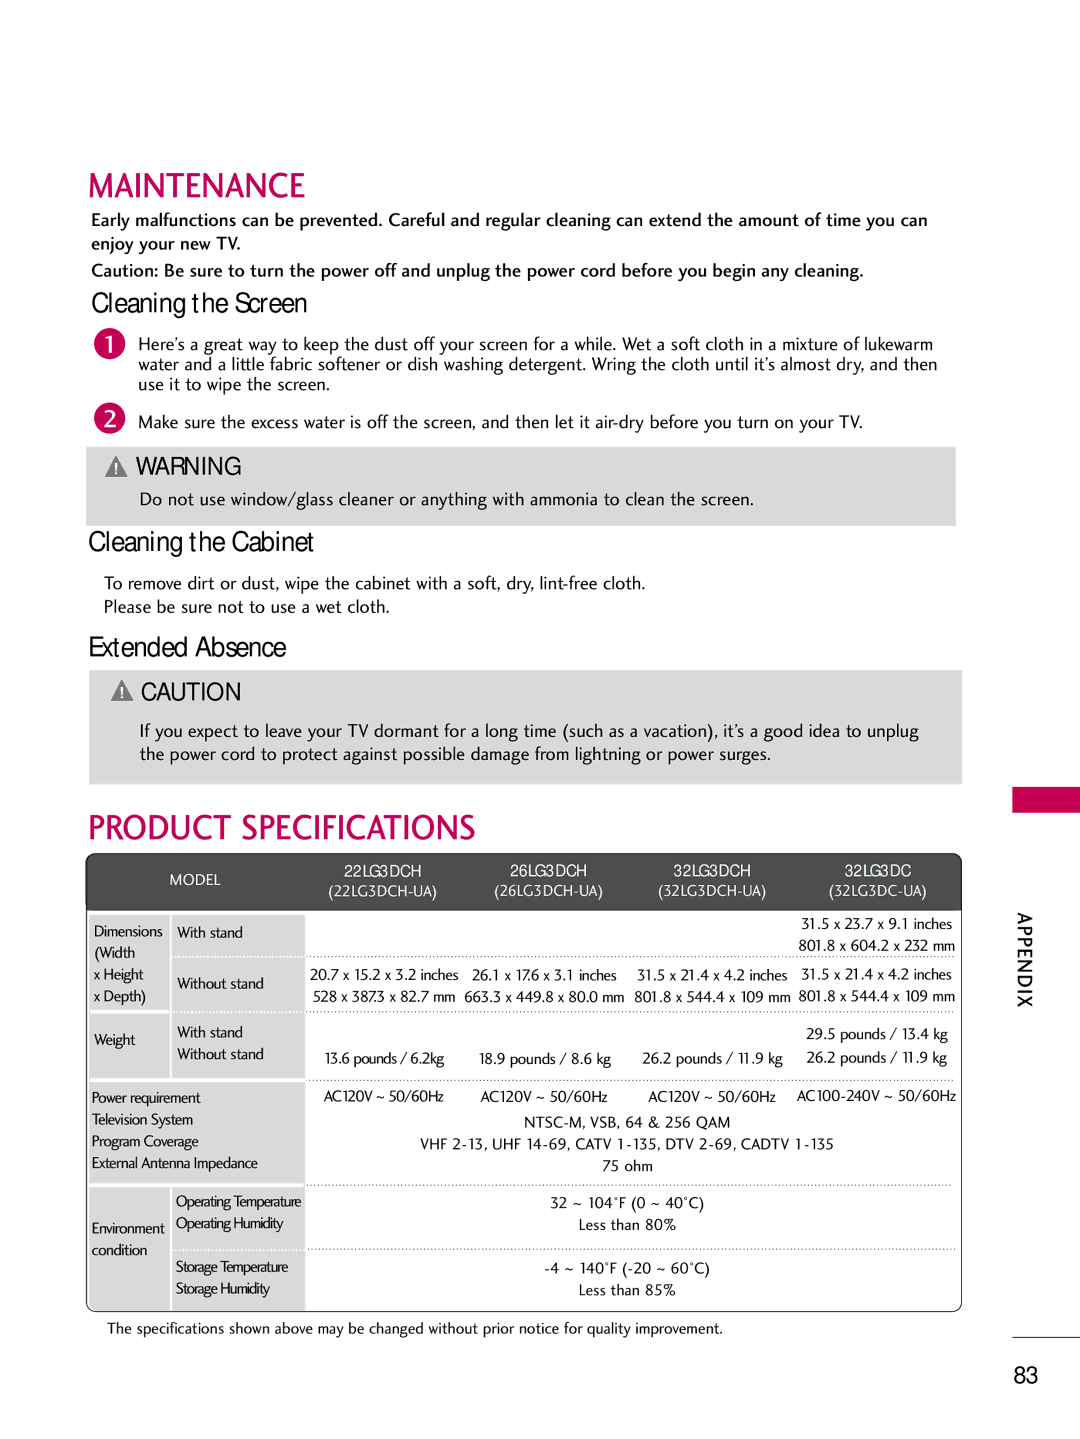 LG Electronics 223DCH Maintenance, Product Specifications, Cleaning the Screen, Cleaning the Cabinet, Extended Absence 